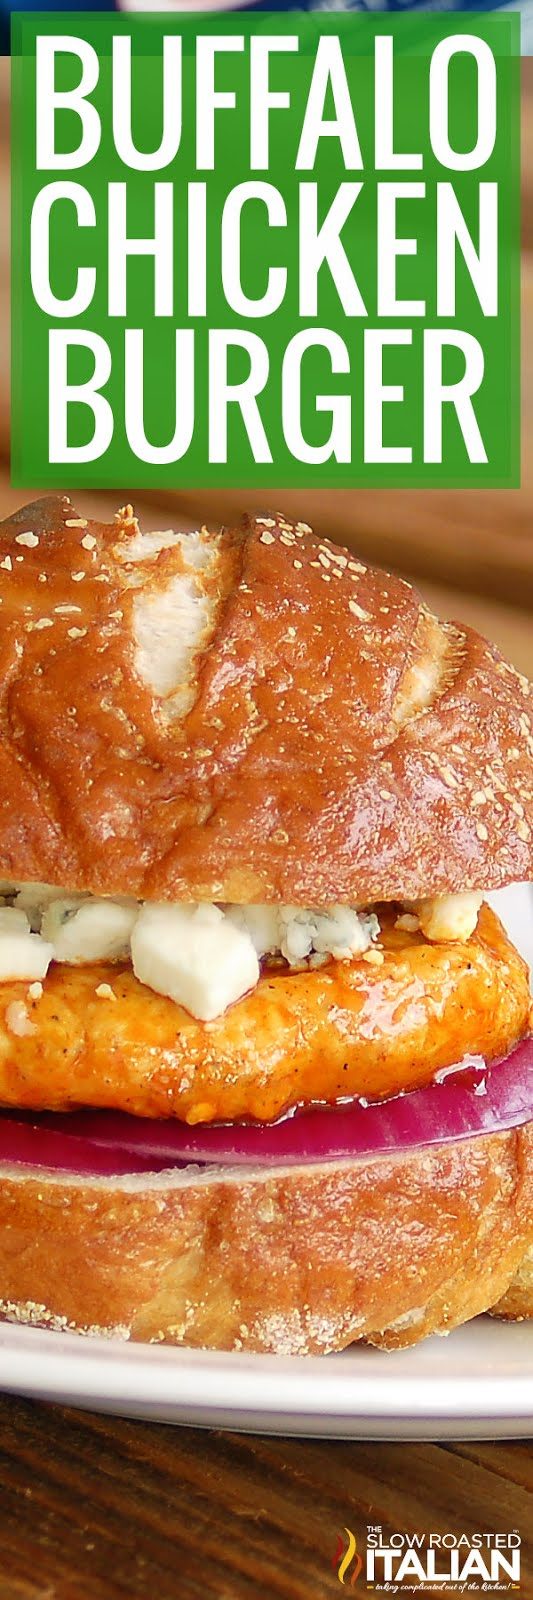 titled image for Pinterest (and shown close up): Spicy Buffalo Chicken Burgers